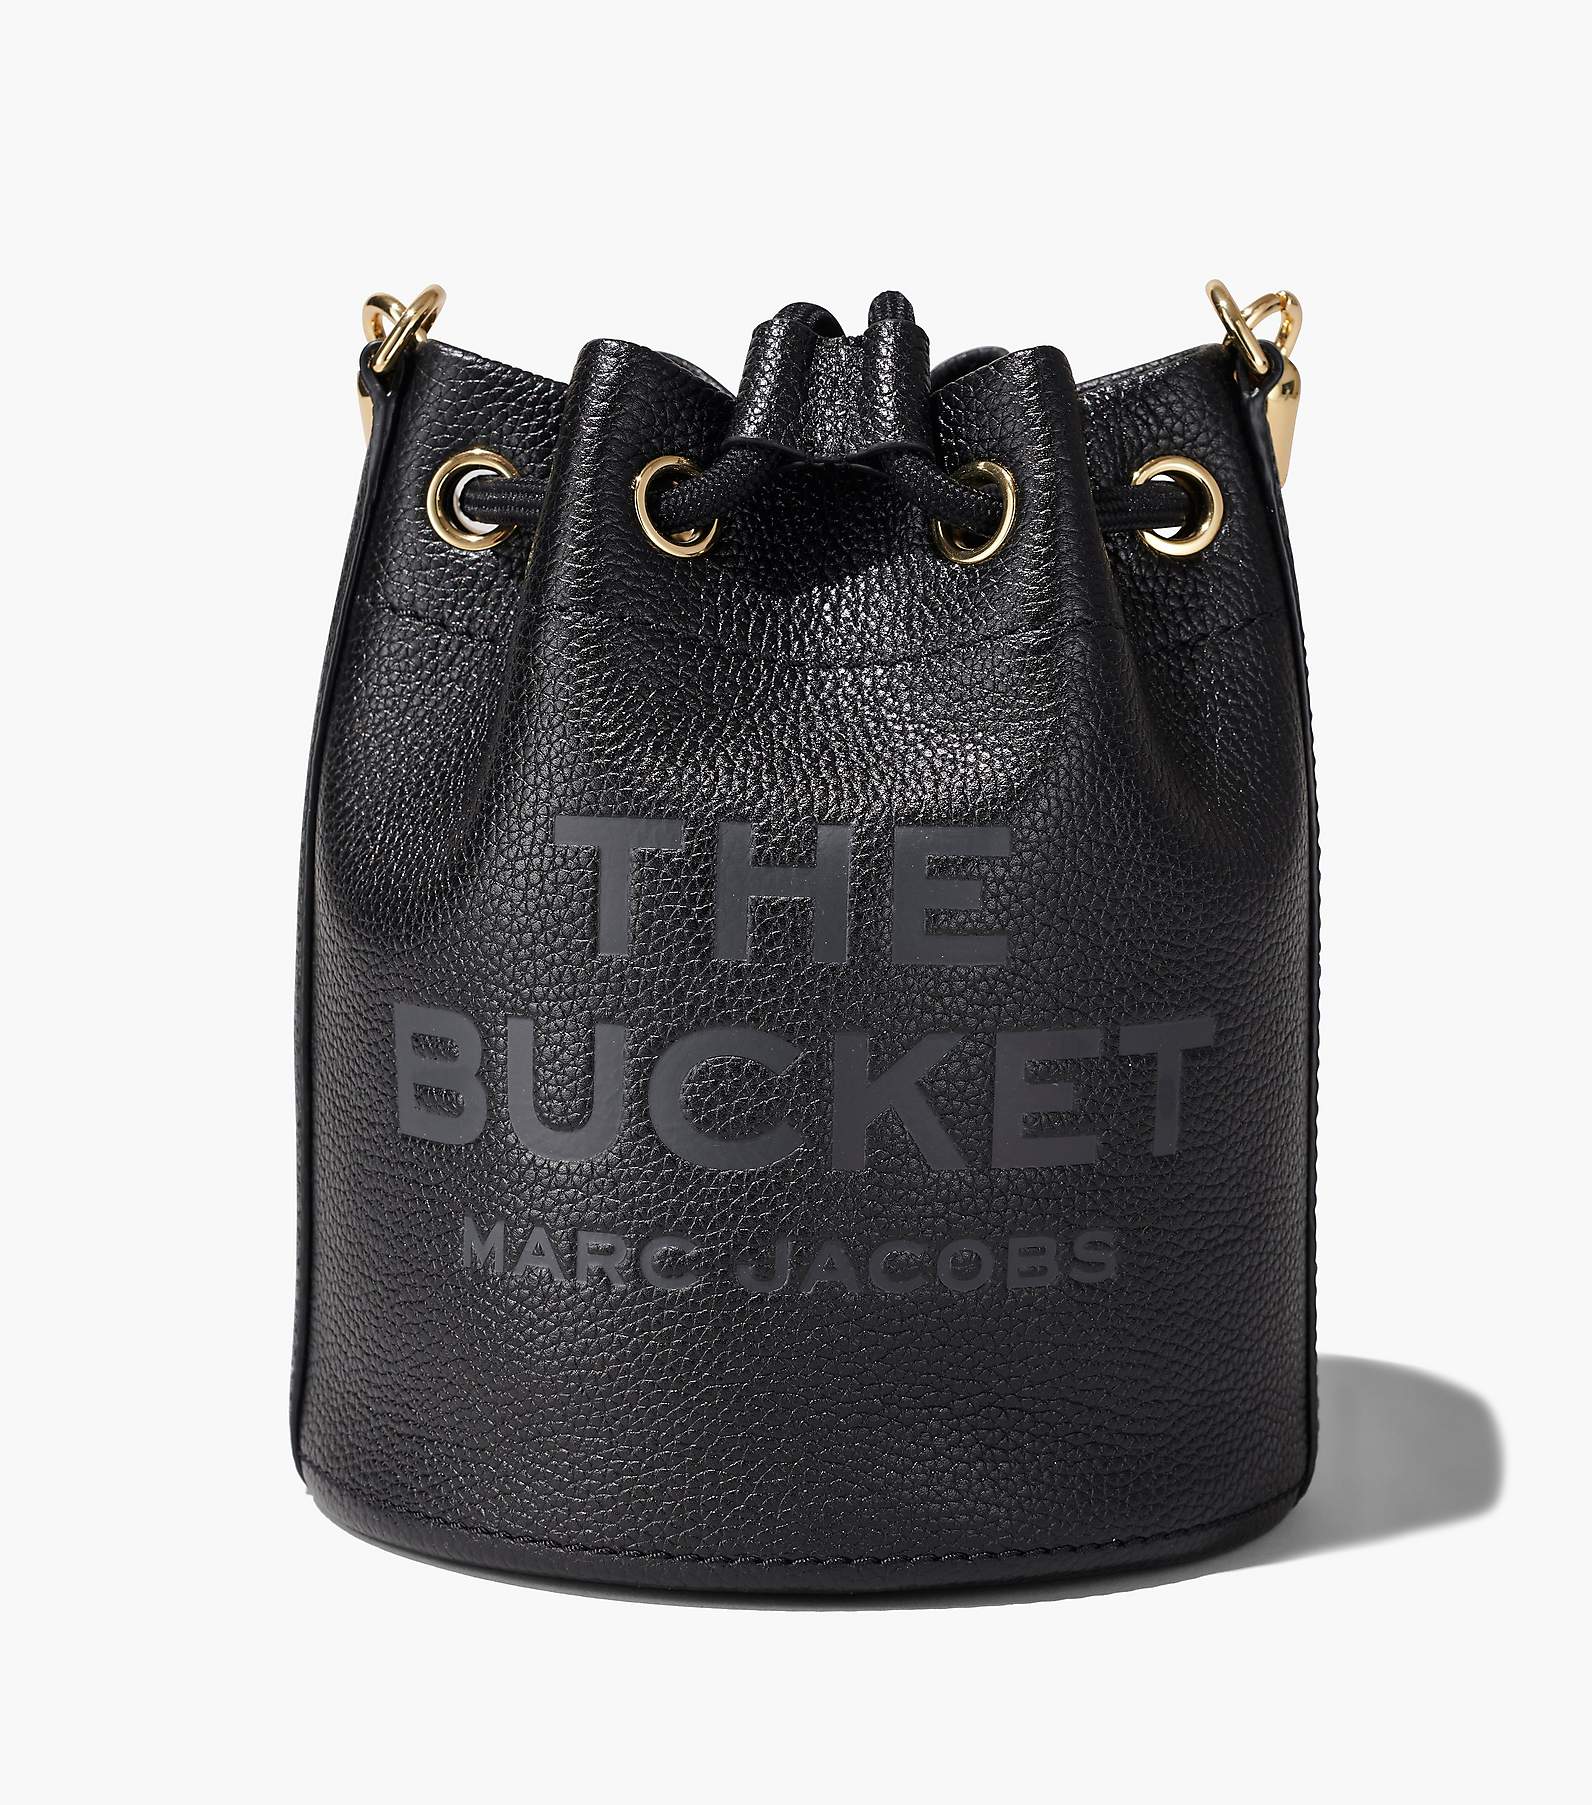 Marc Jacobs Women's The Leather Bucket Bag